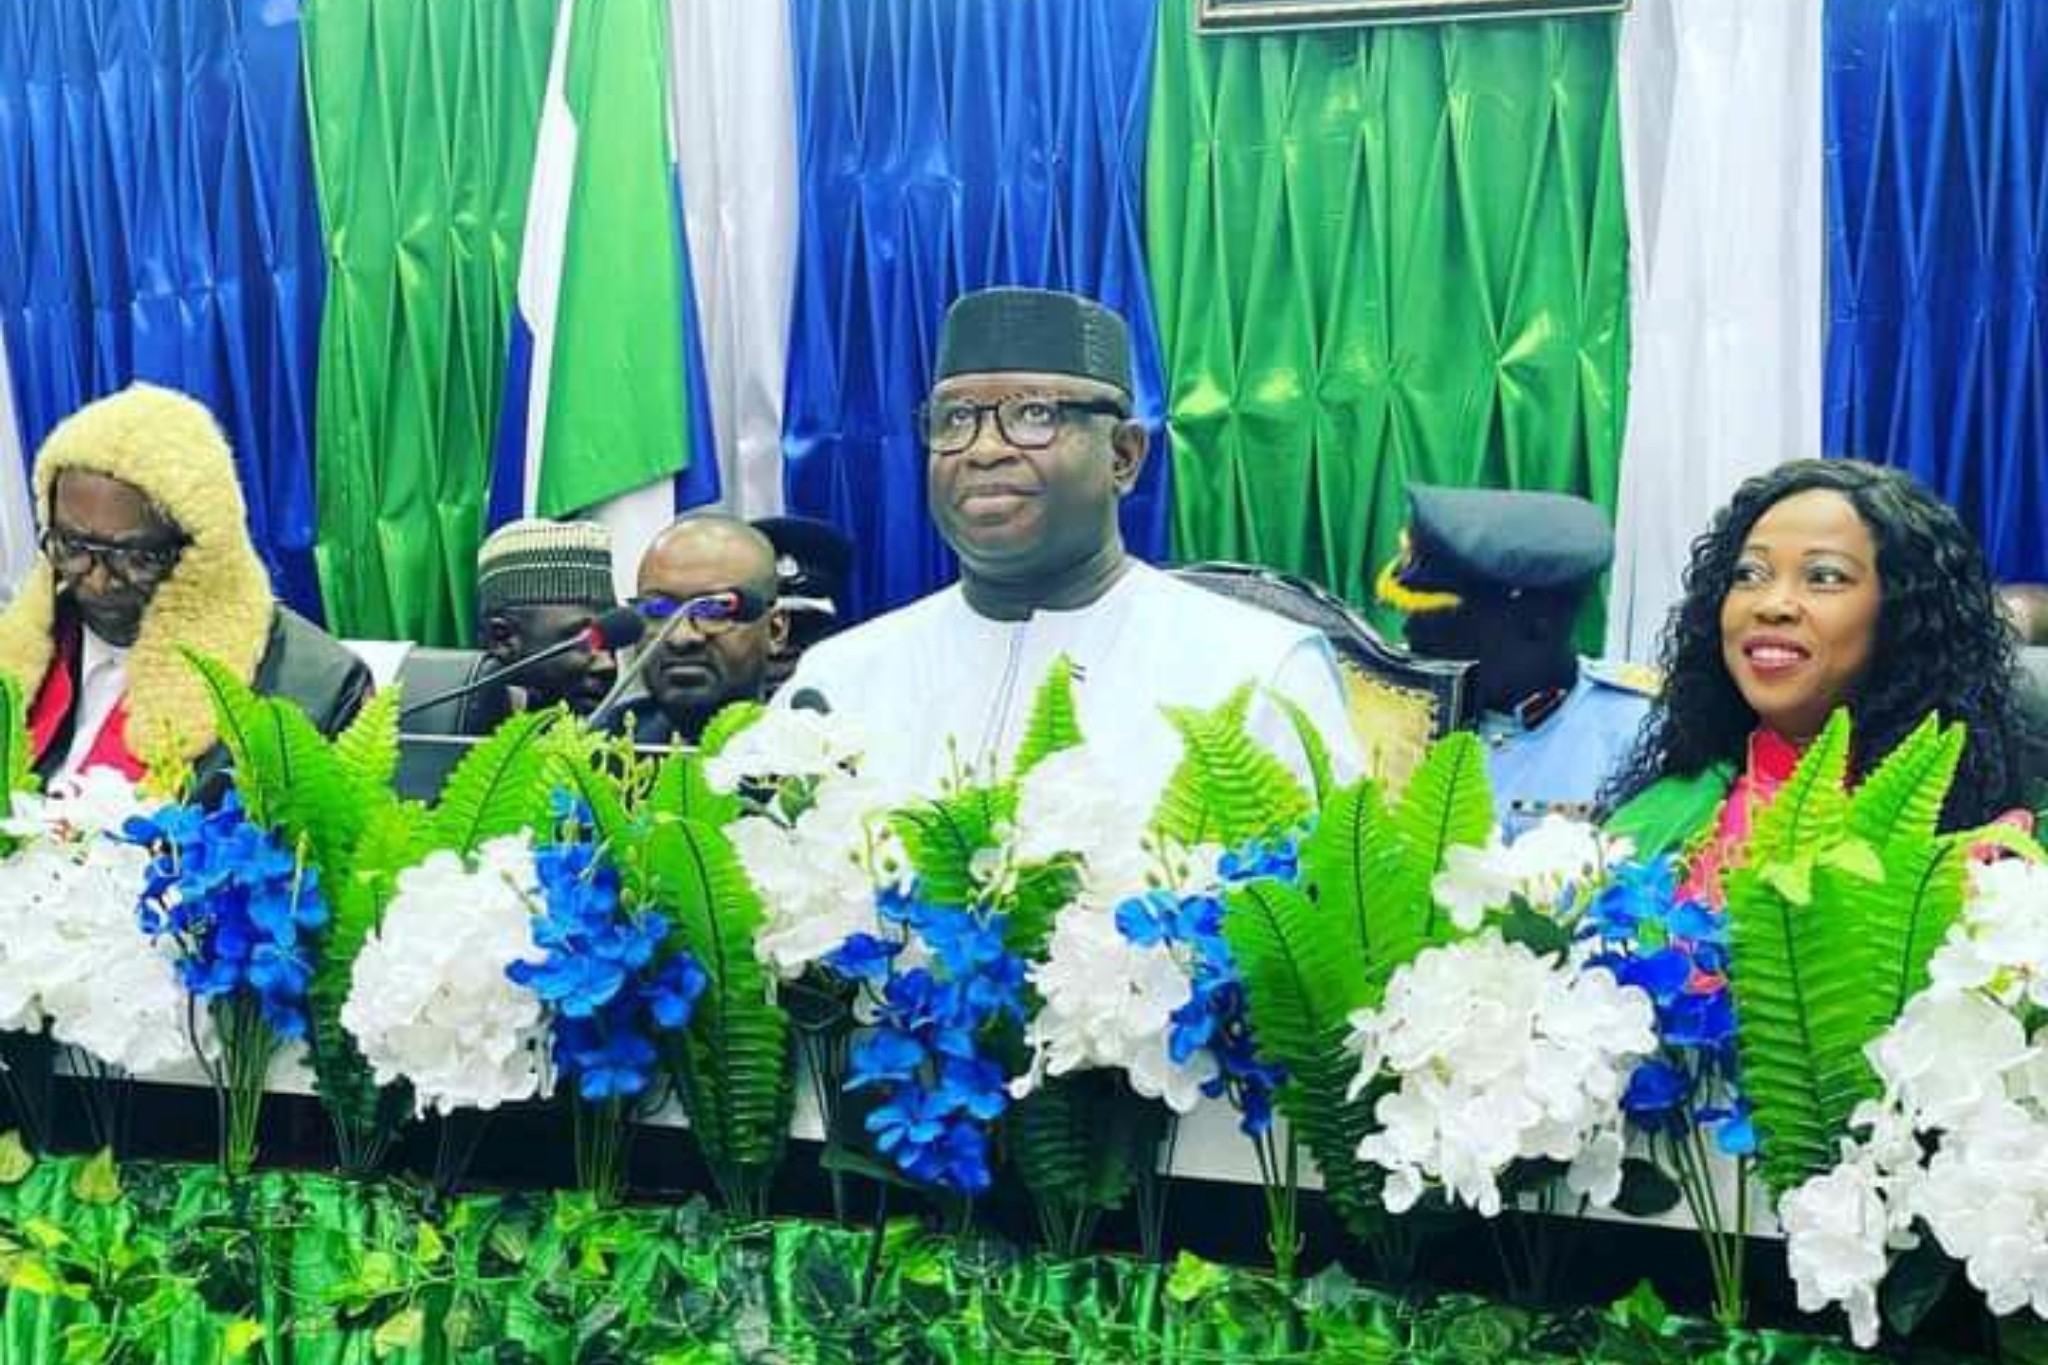 “Access to Energy Has Considerably Improved Since 2018” – President Bio Tells Sierra Leoneans